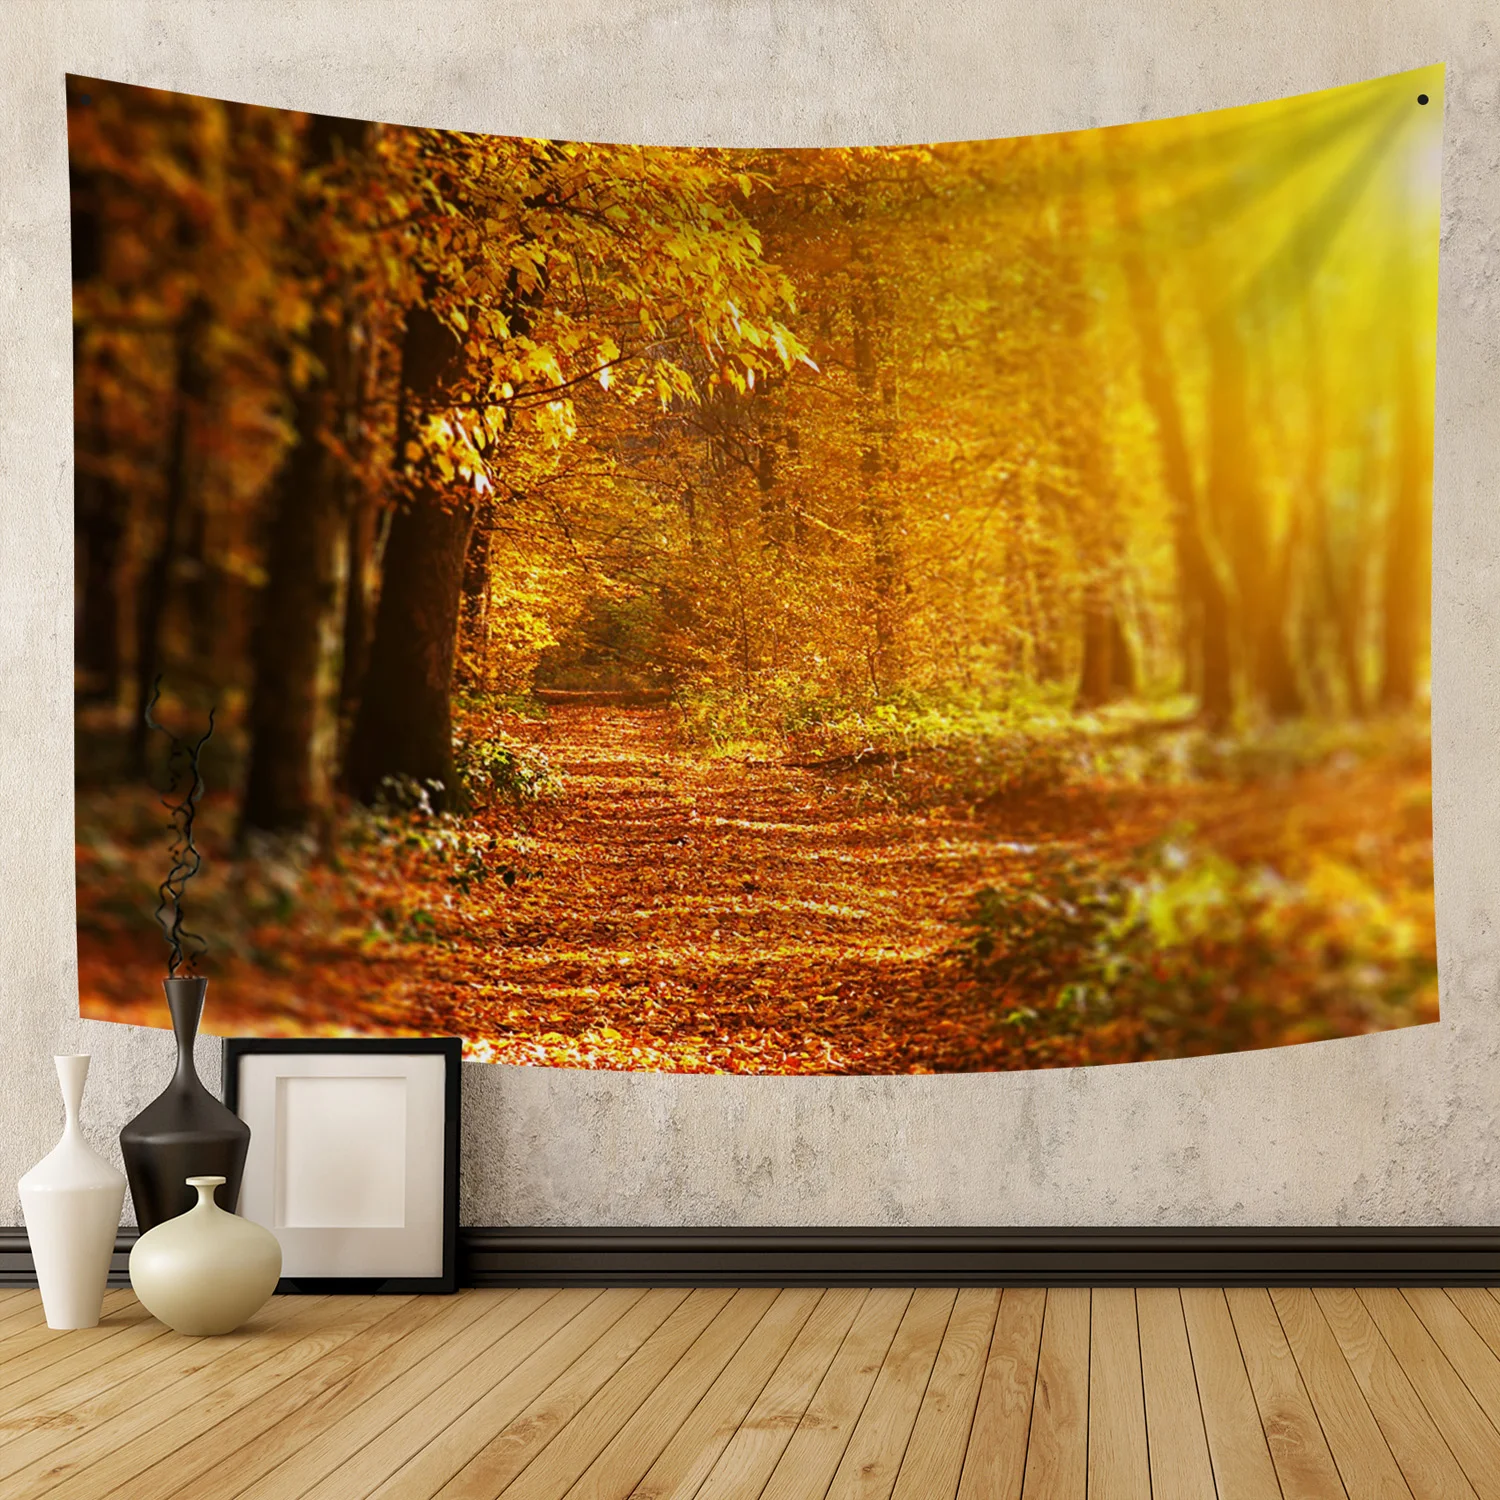 

Forest Pathway Mountain Tapestry The Sunset Autumn Fallen Leaves Hanging Art Nature Landscape Tapestry Decor Living Room Bedroom